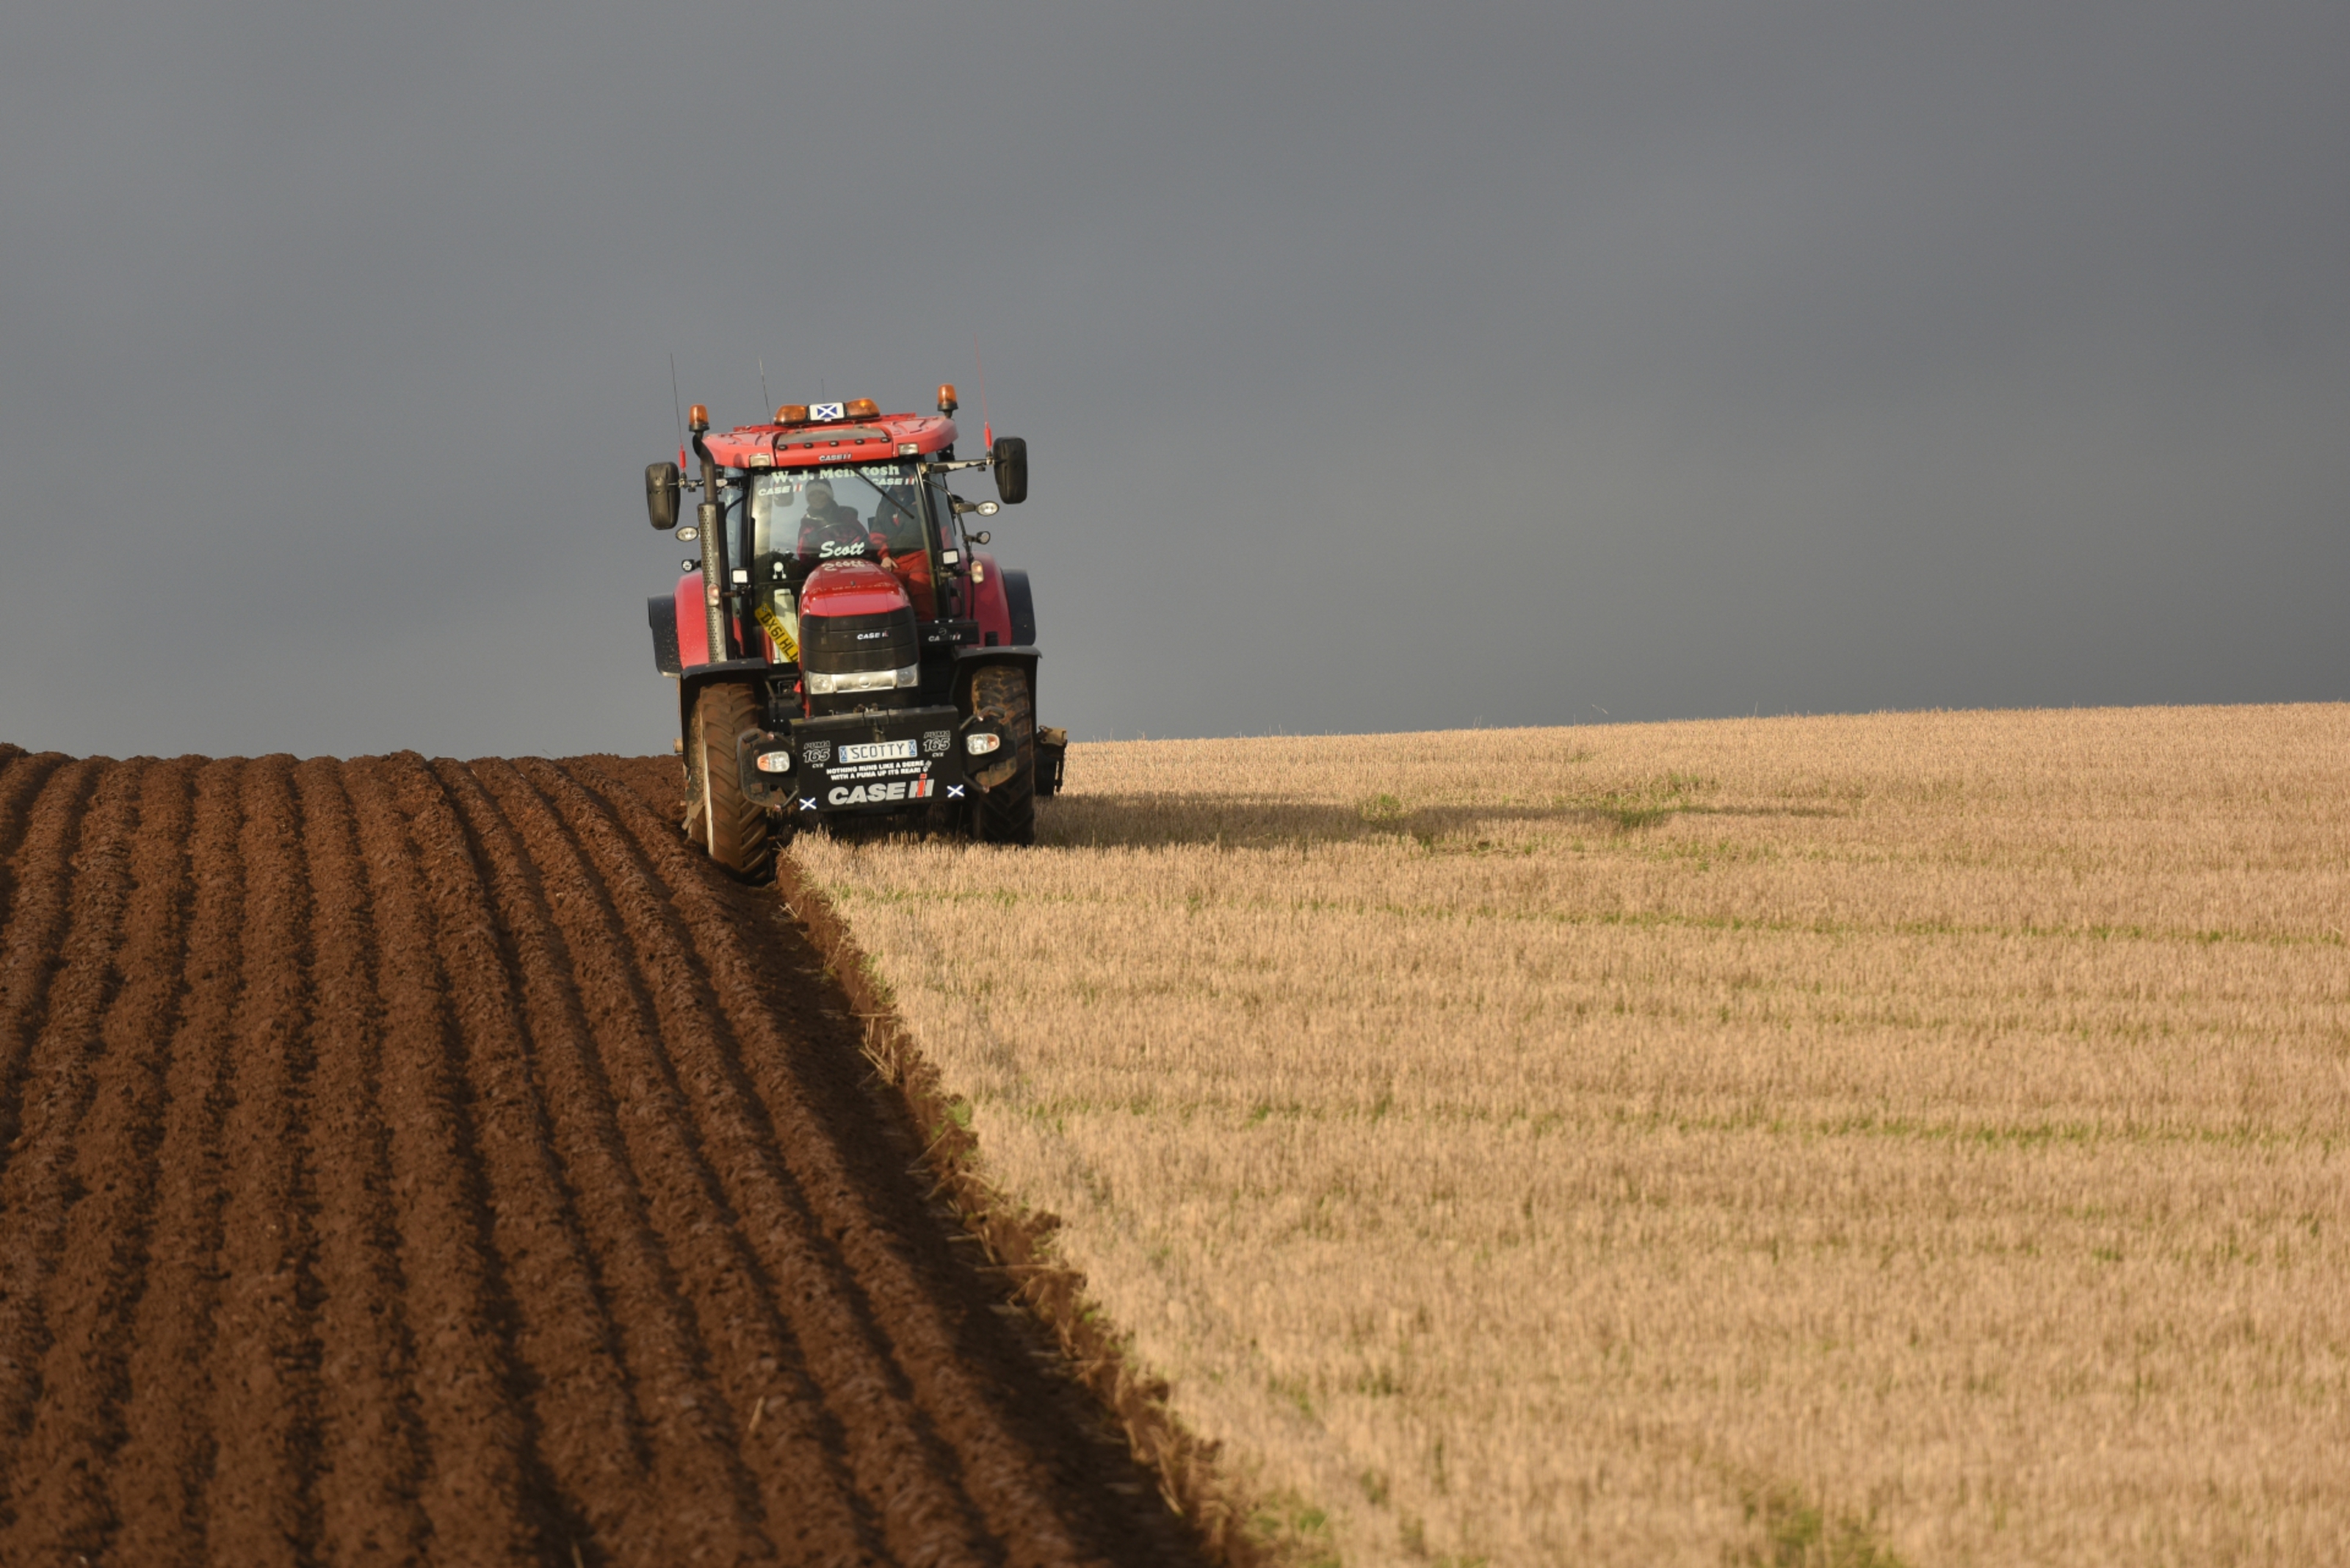 Gayle ploughing a strip of land near Coupar Angus under the watchful eye of Scott McIntosh.